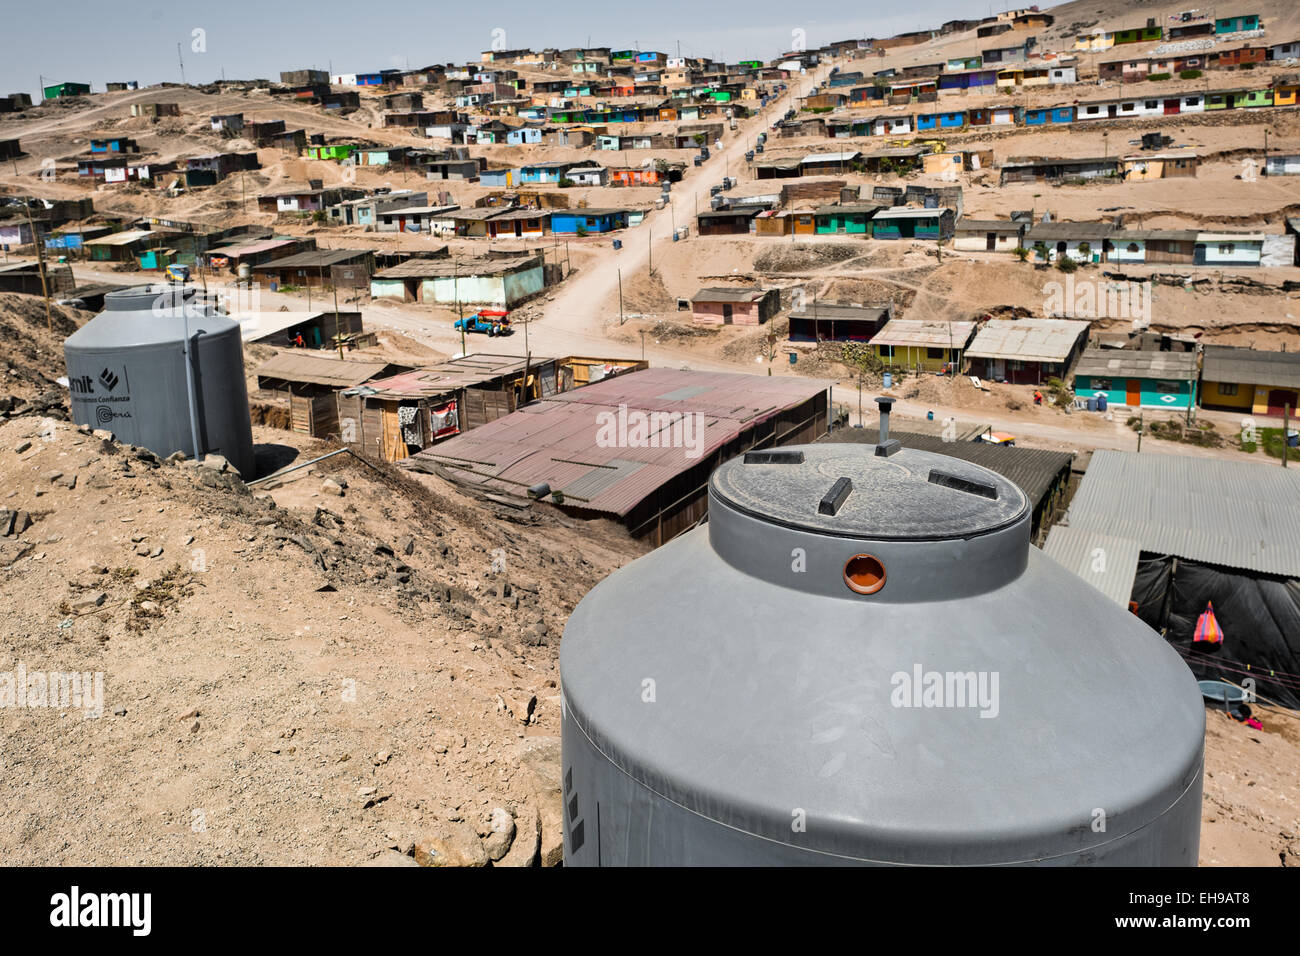 https://c8.alamy.com/comp/EH9AT8/a-large-plastic-water-tanks-used-for-water-storage-are-seen-on-the-EH9AT8.jpg